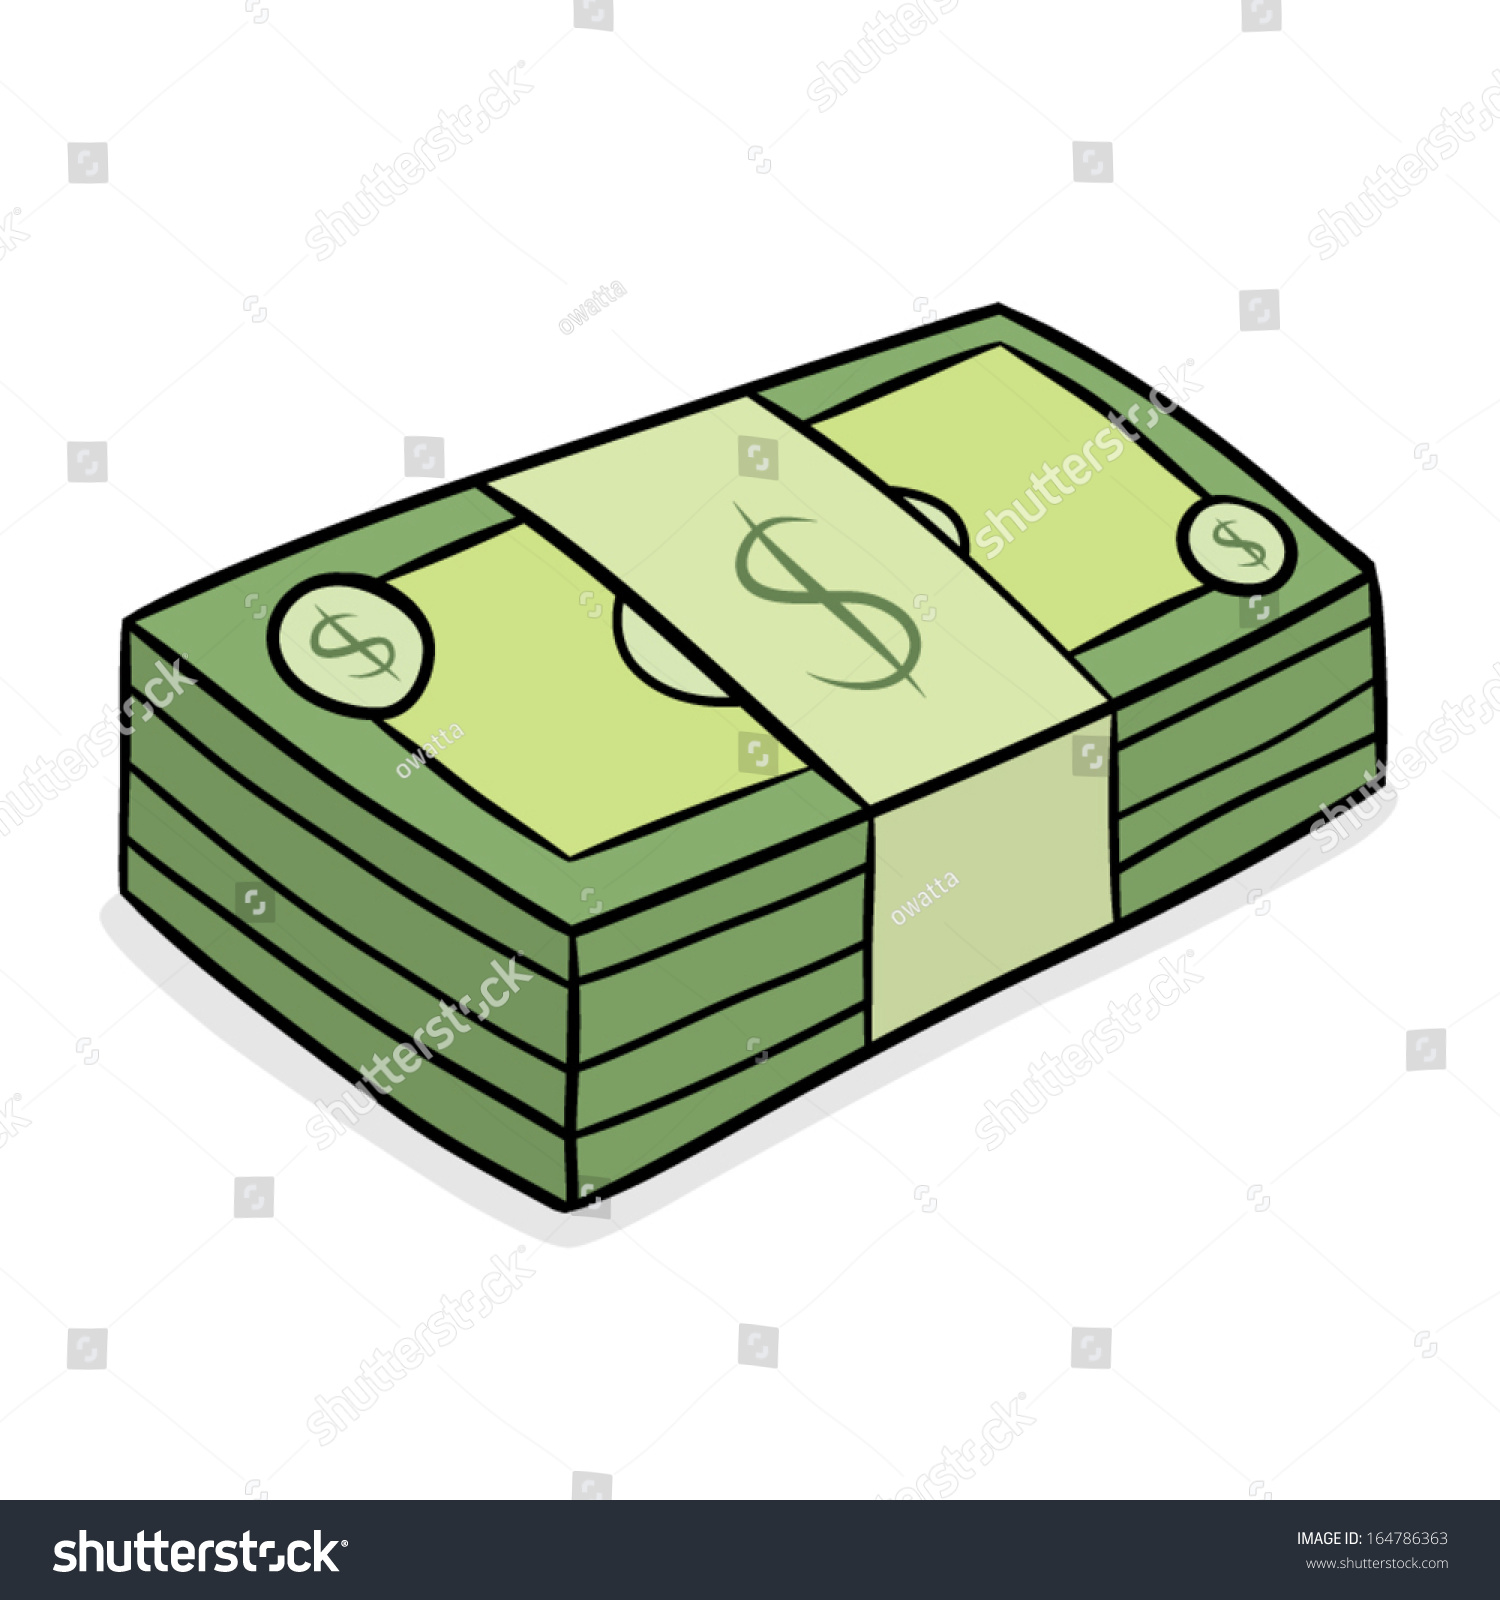 stack of money clipart - photo #46